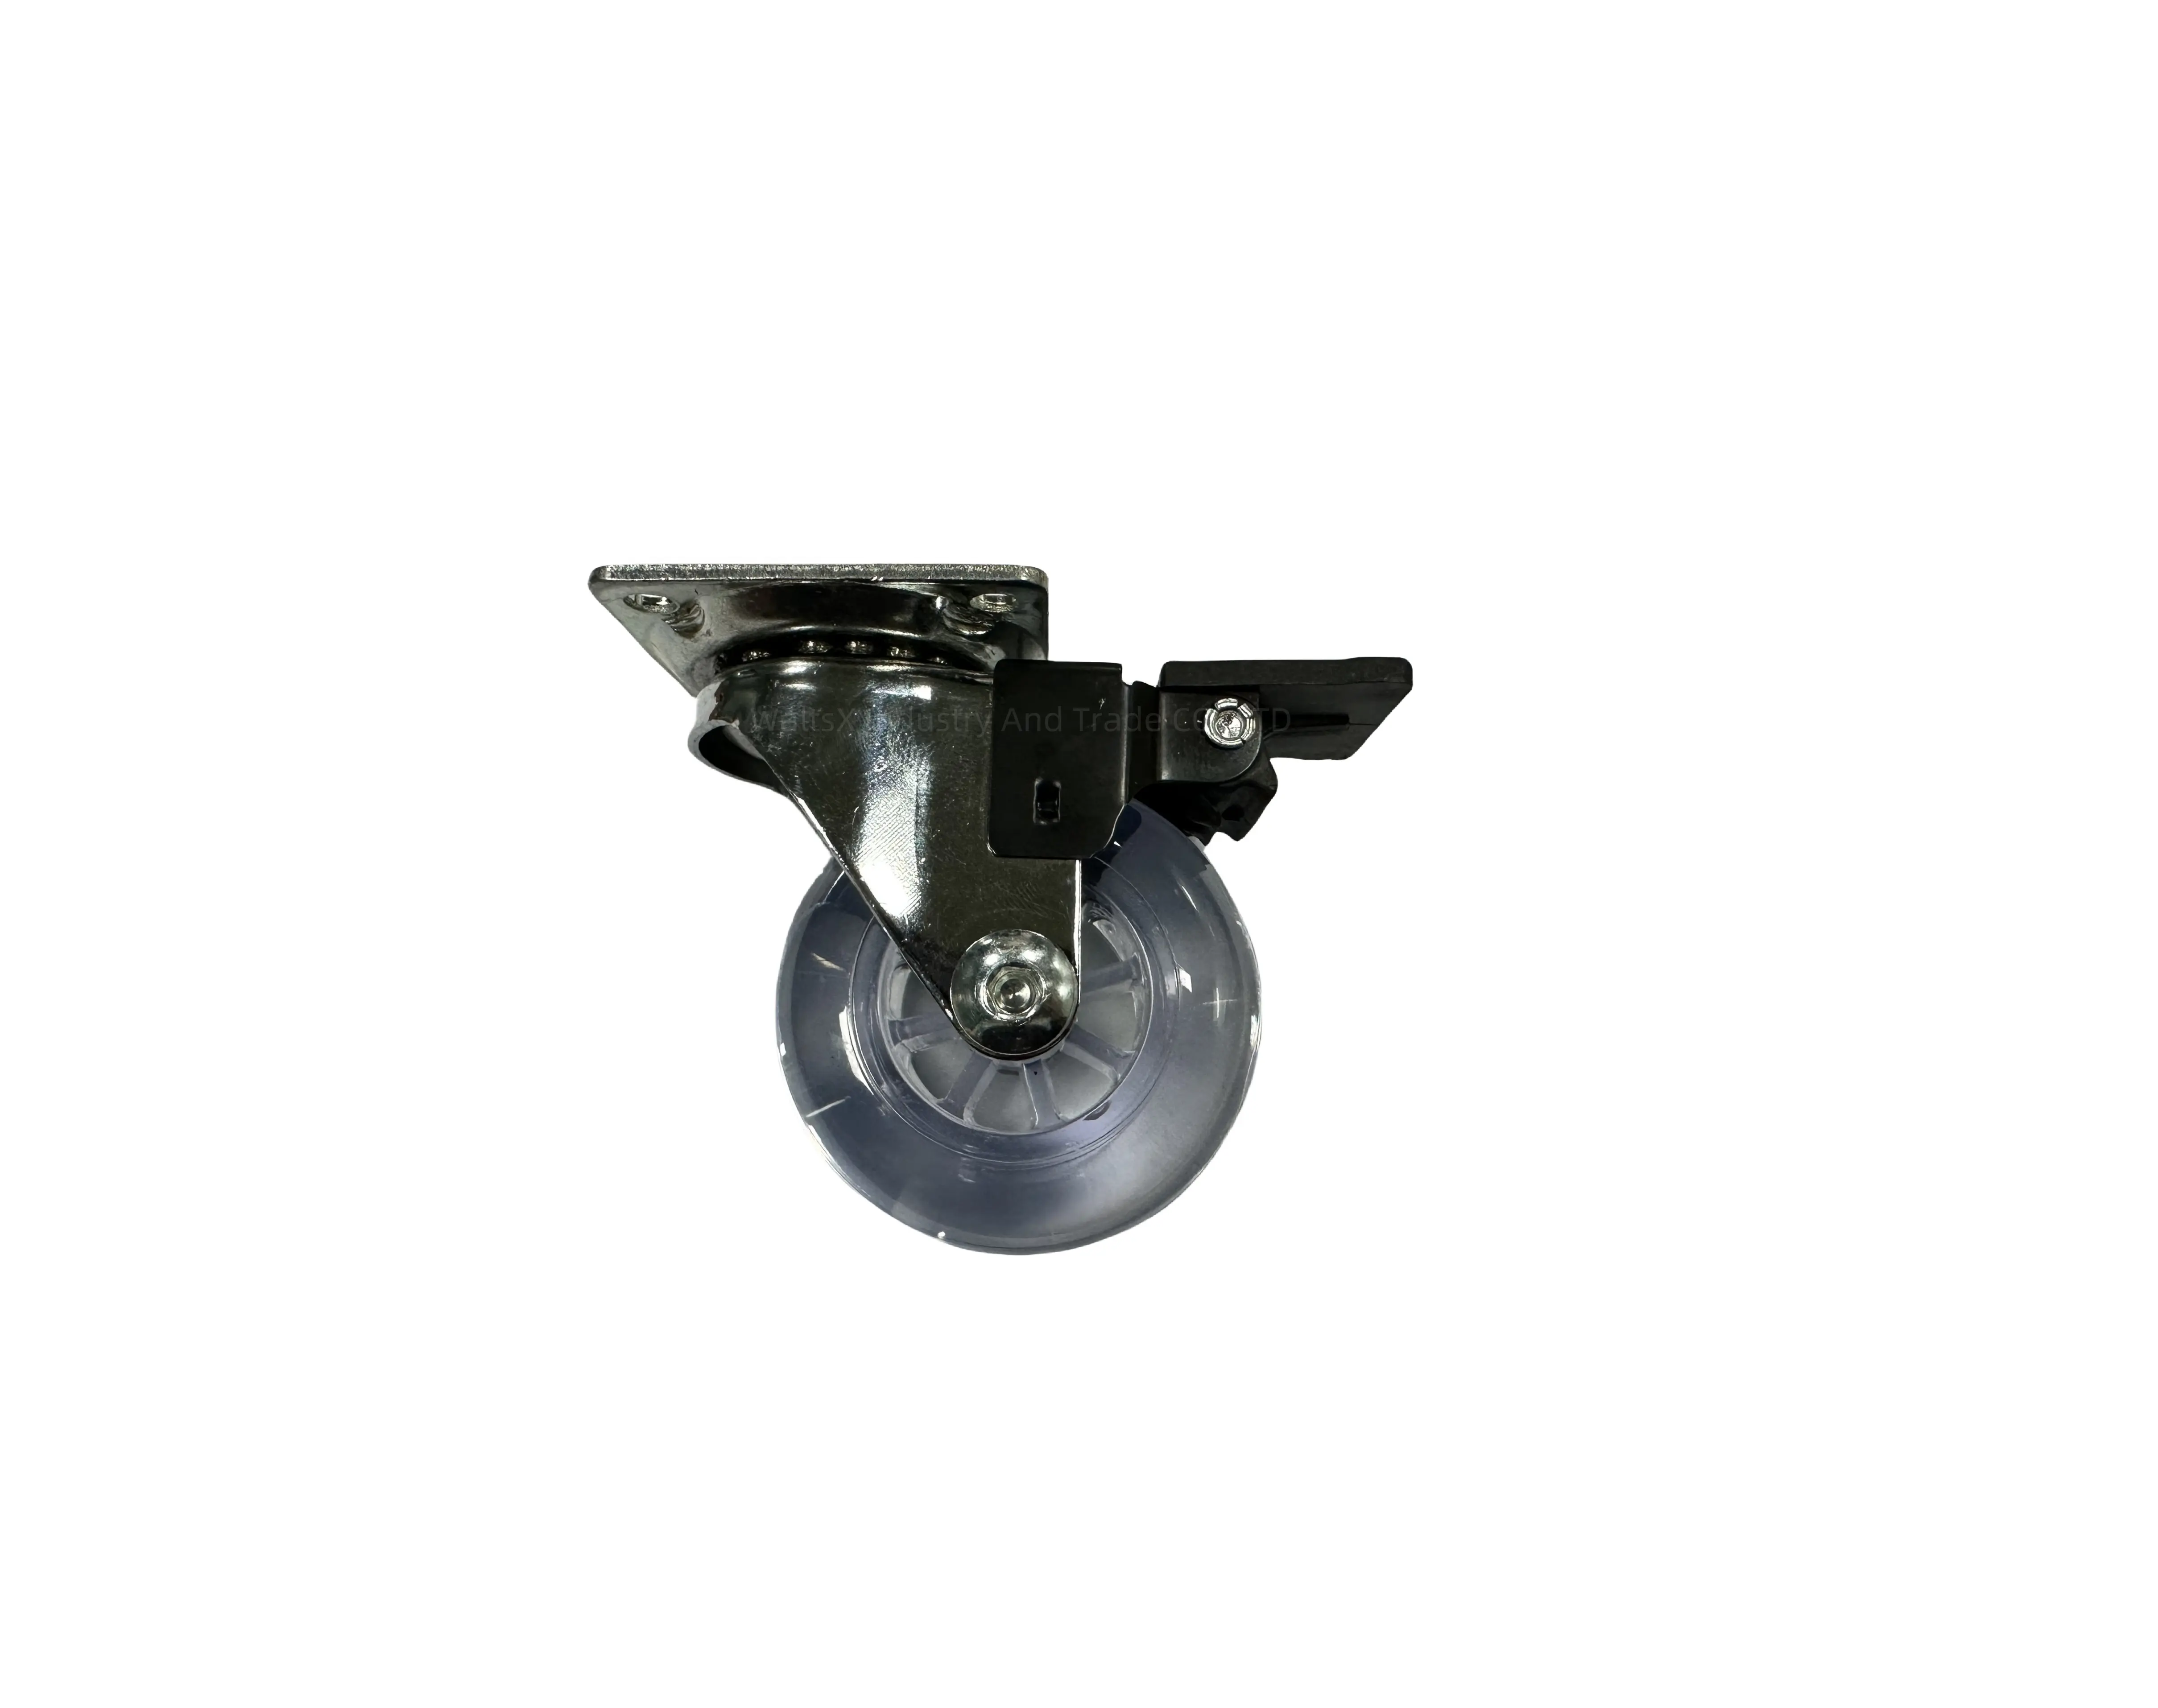 Pu Caster Wheel Transparent 2 Inch Wheel 360 Degree Rotation With Brakes Galvanized Bracket For Factory Cart